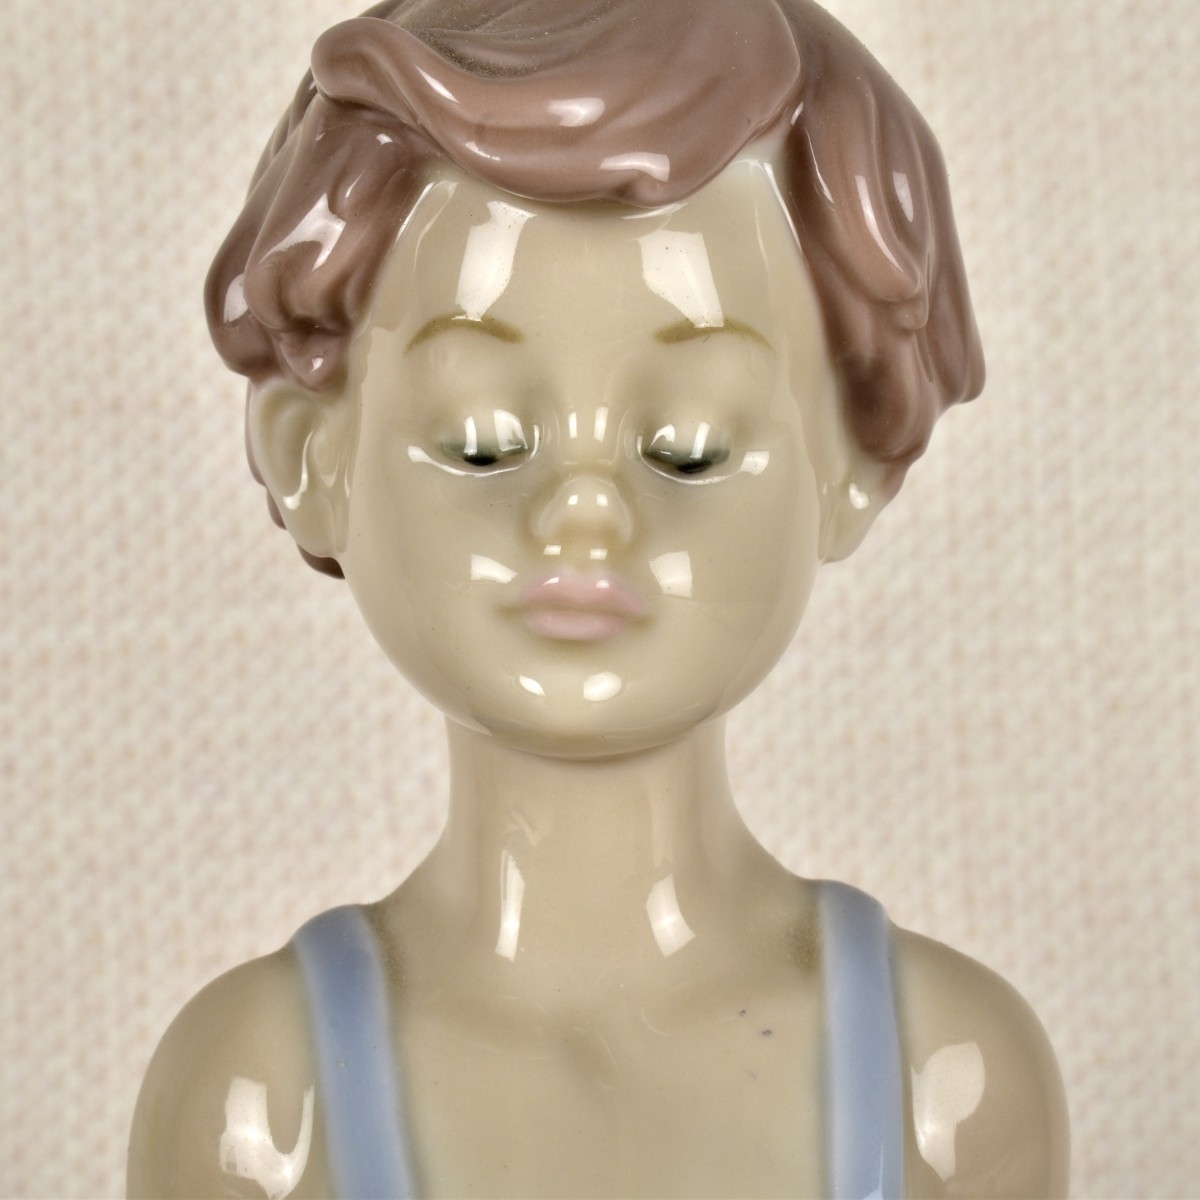 Lladro Figurines of Young Girls